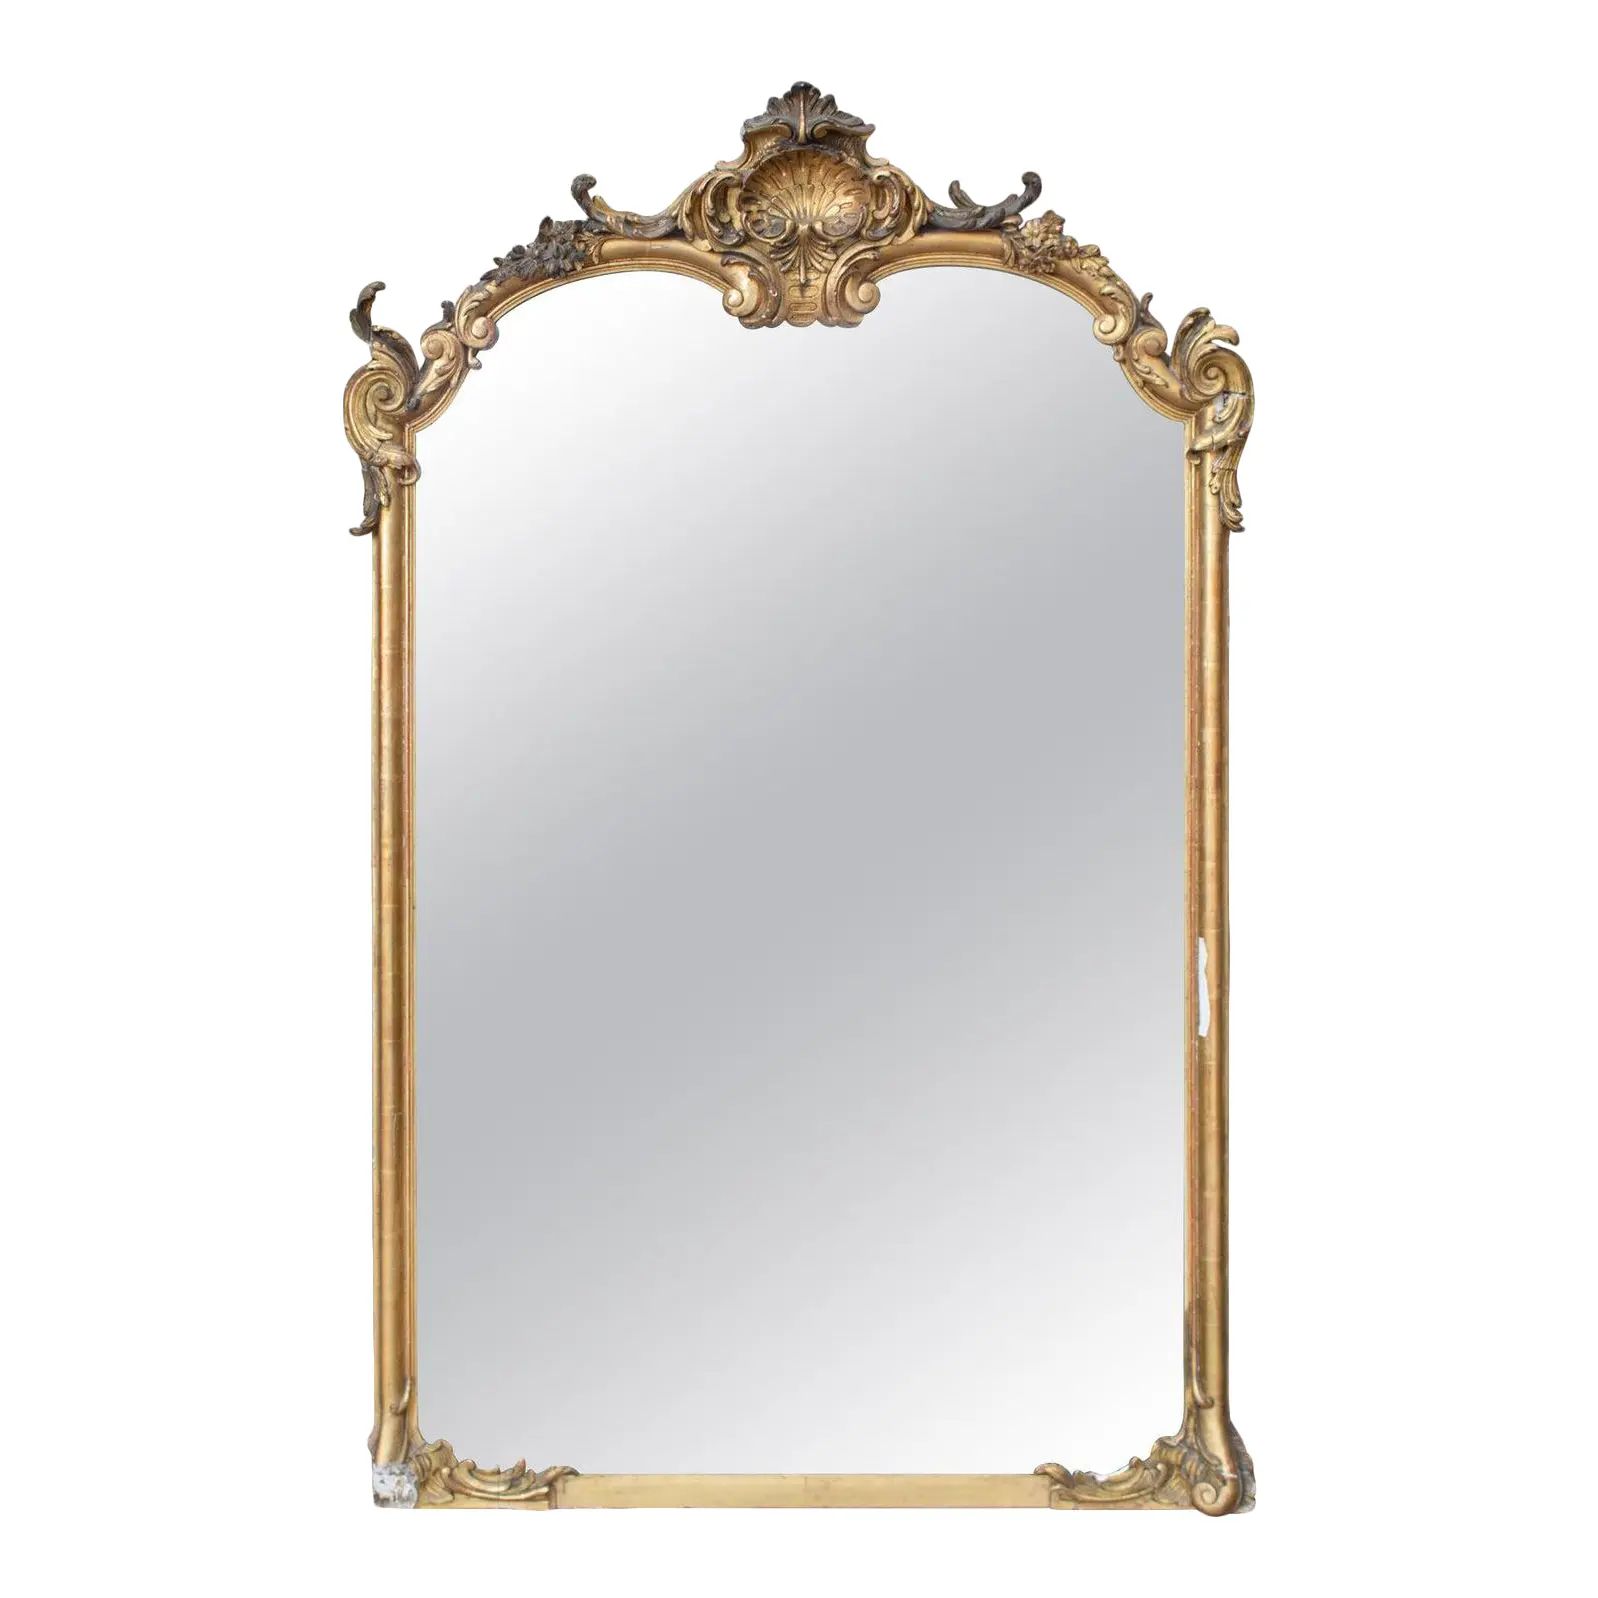 Antique Gilt Full-Length Mirror With Decorative Carvings and Shell Cartouche | Chairish